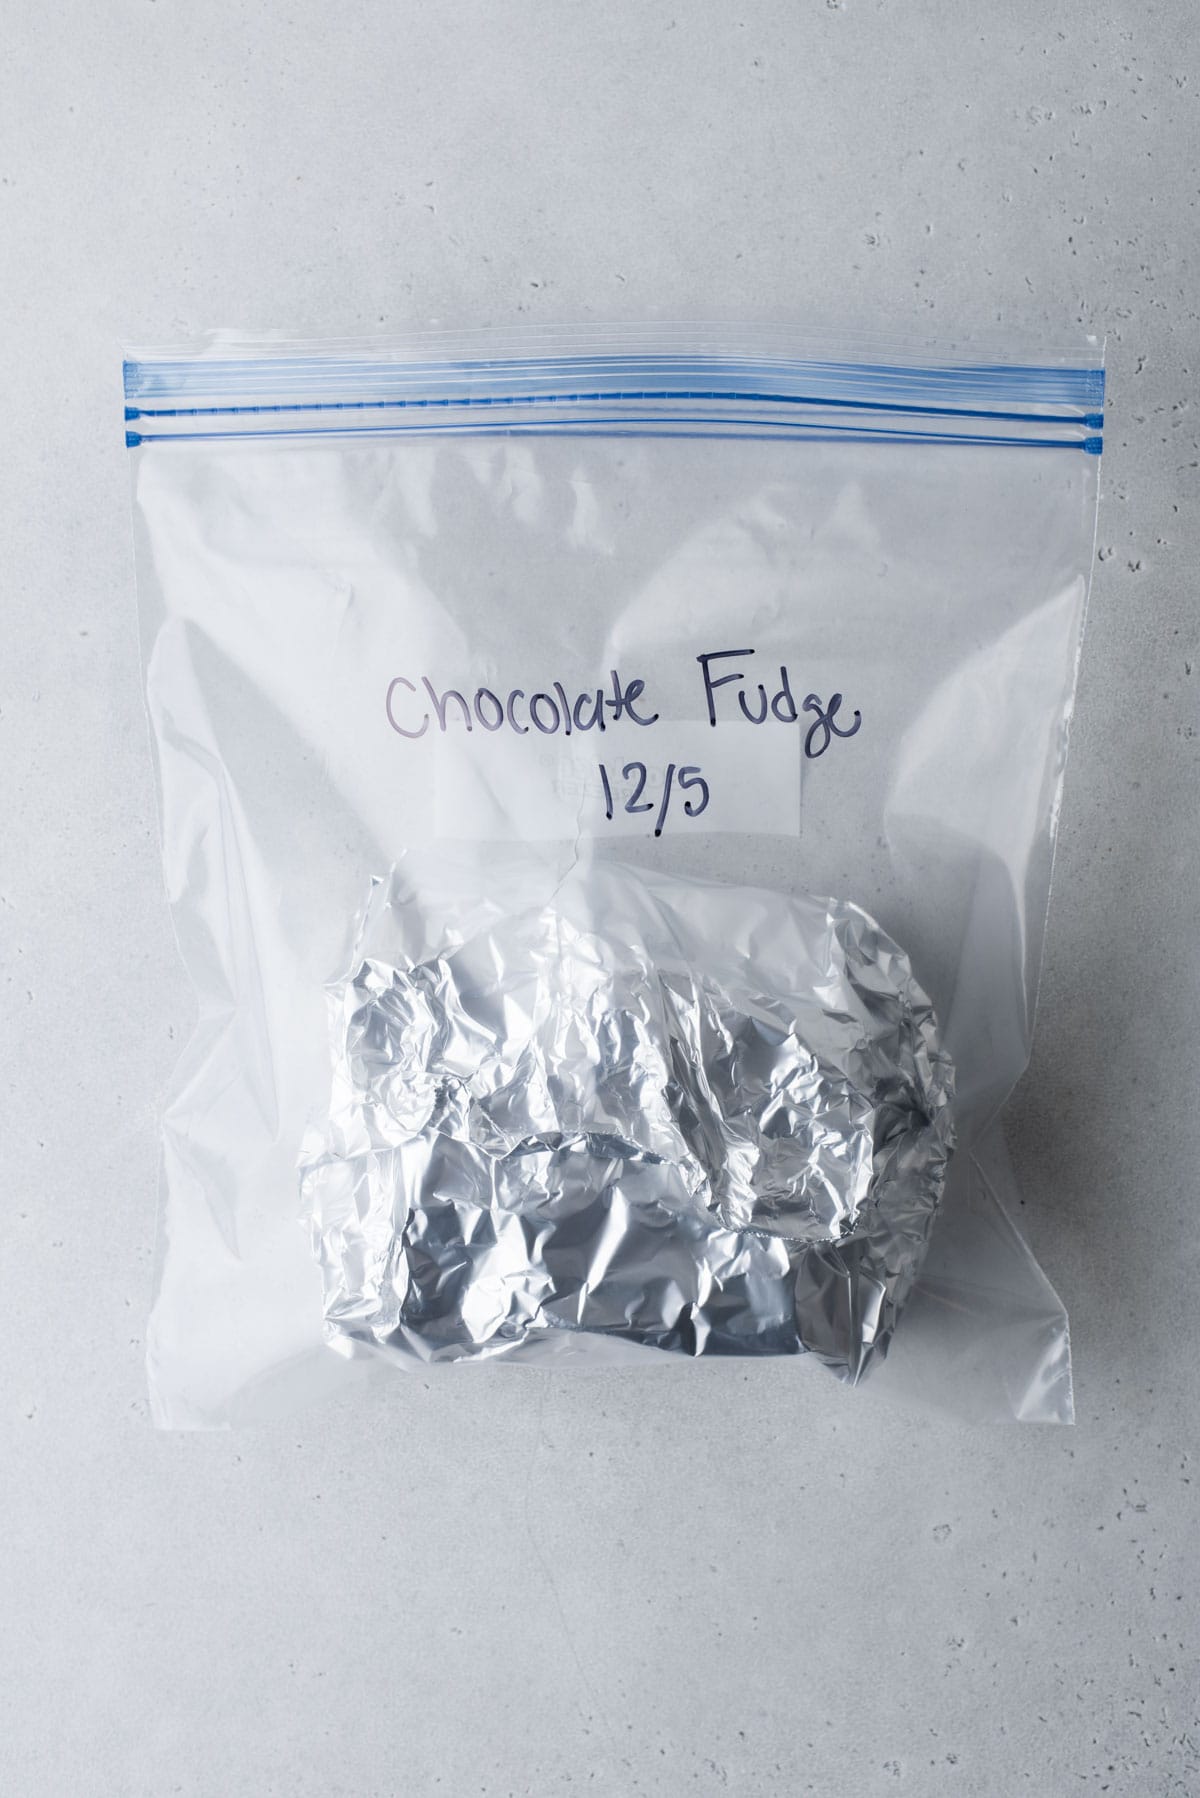 chocolate fudge wrapped for the freezer